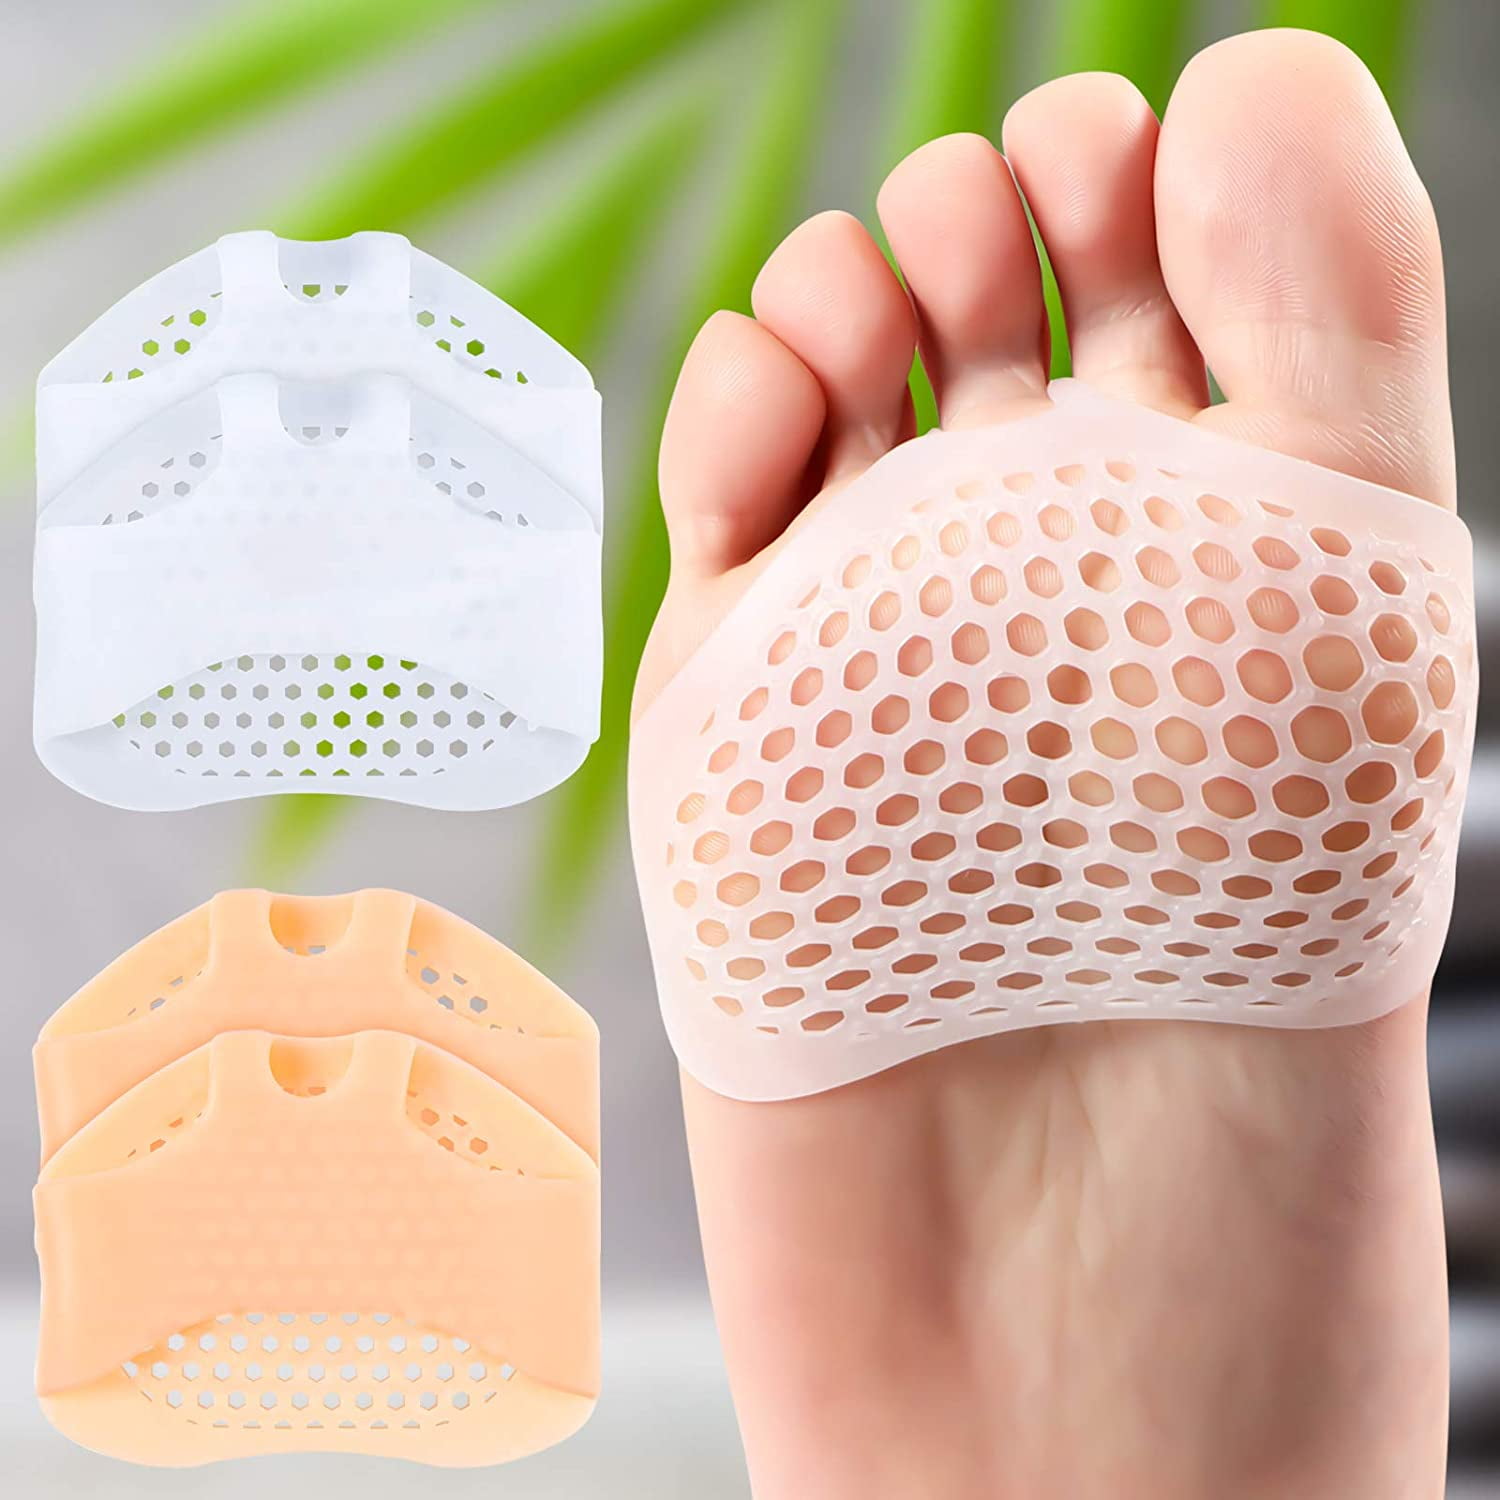 2x Silicone Gel Shoe Front Pads Cushion Insert Insoles Half Yard Stick Foot Care 